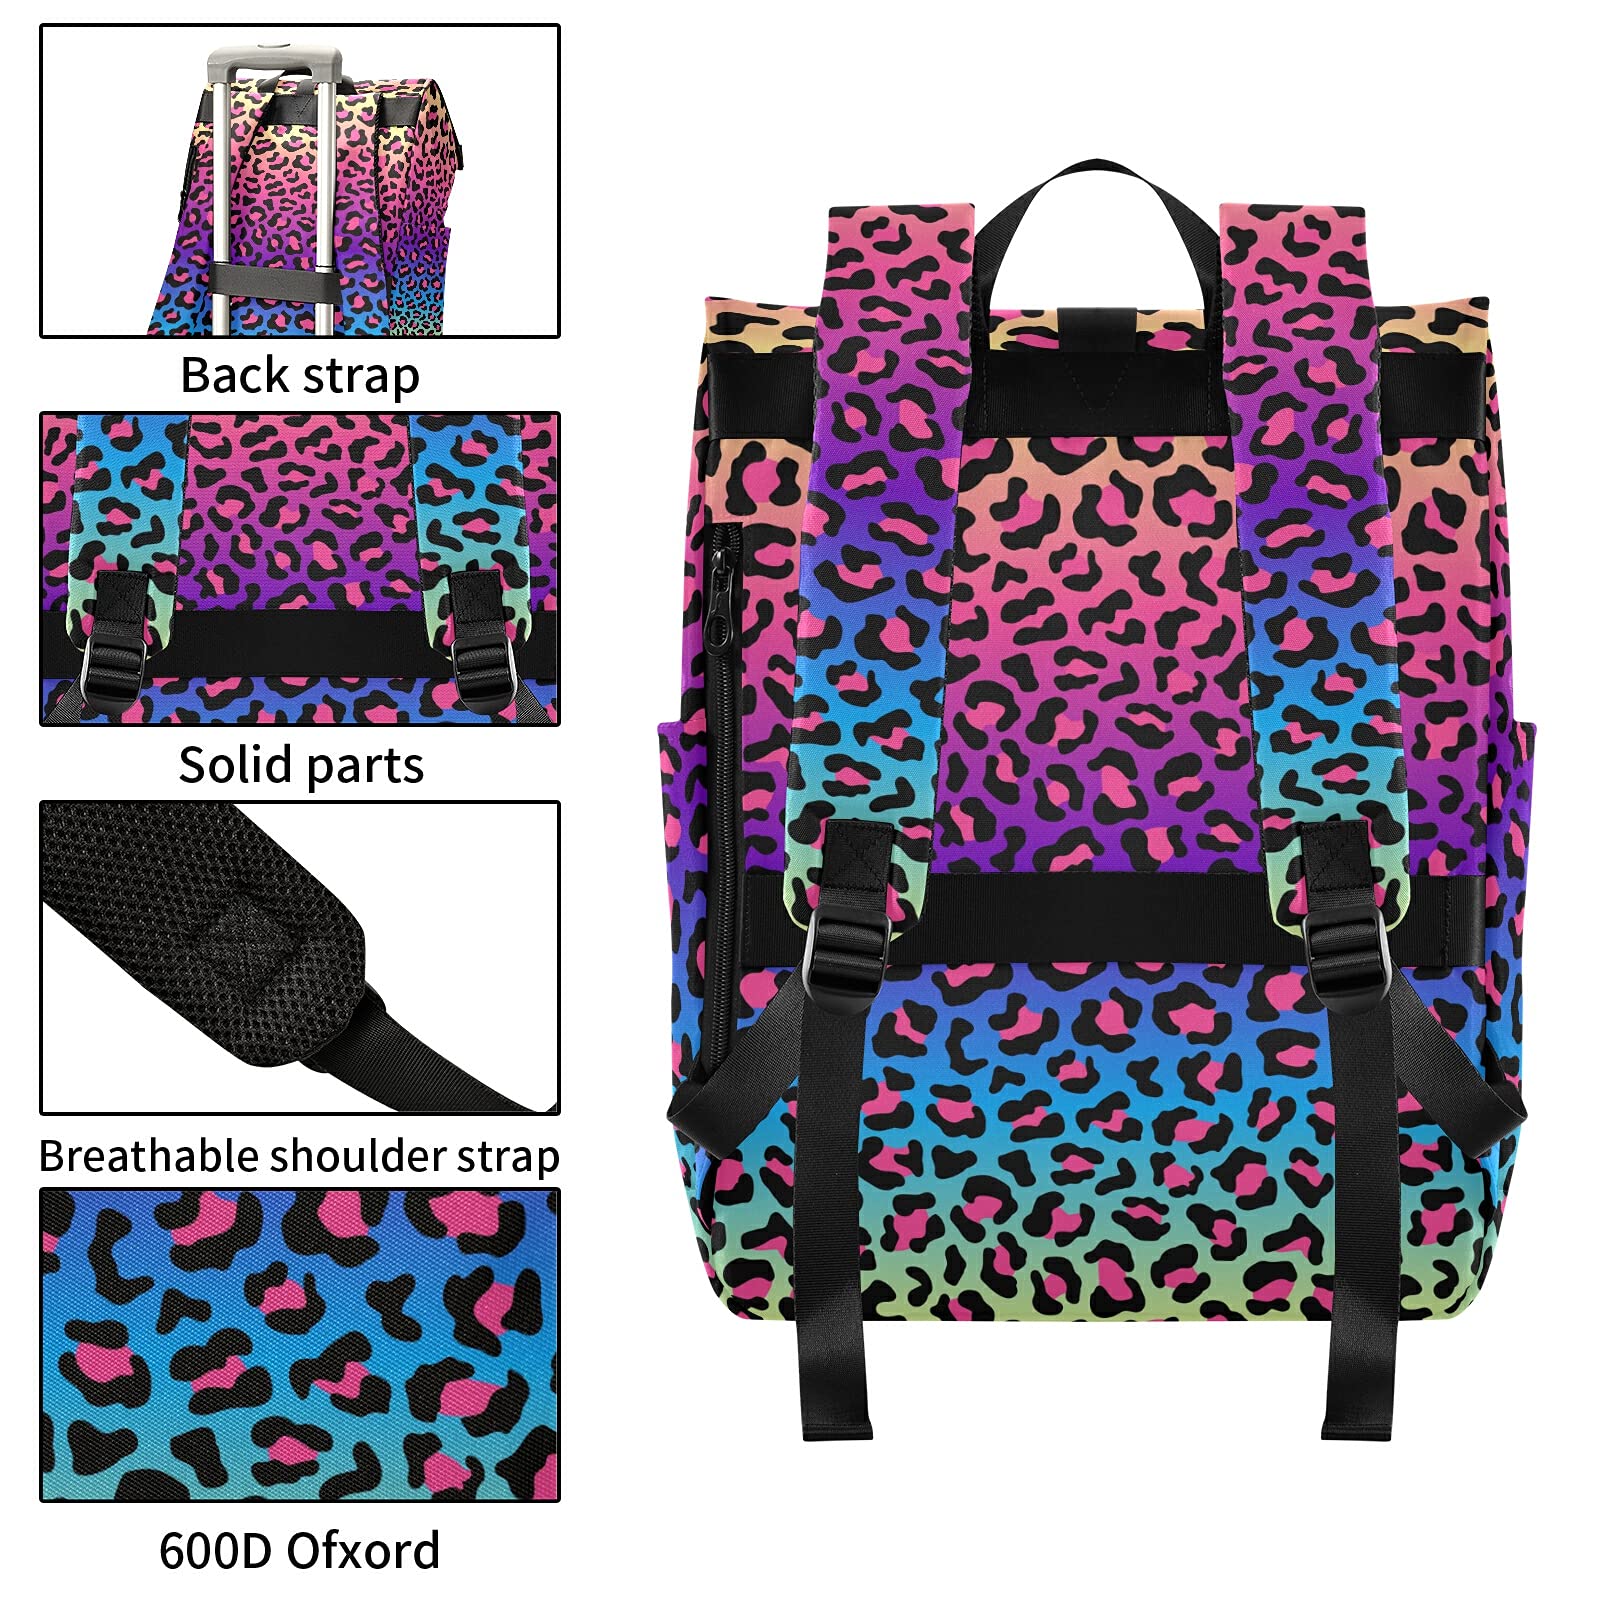 ALAZA Neon Rainbow Leopard Cheetah Large Laptop Backpack Purse for Women Men Waterproof Anti Theft Roll Top Backpack, 13 - 17.3 inch, Multi, One Size